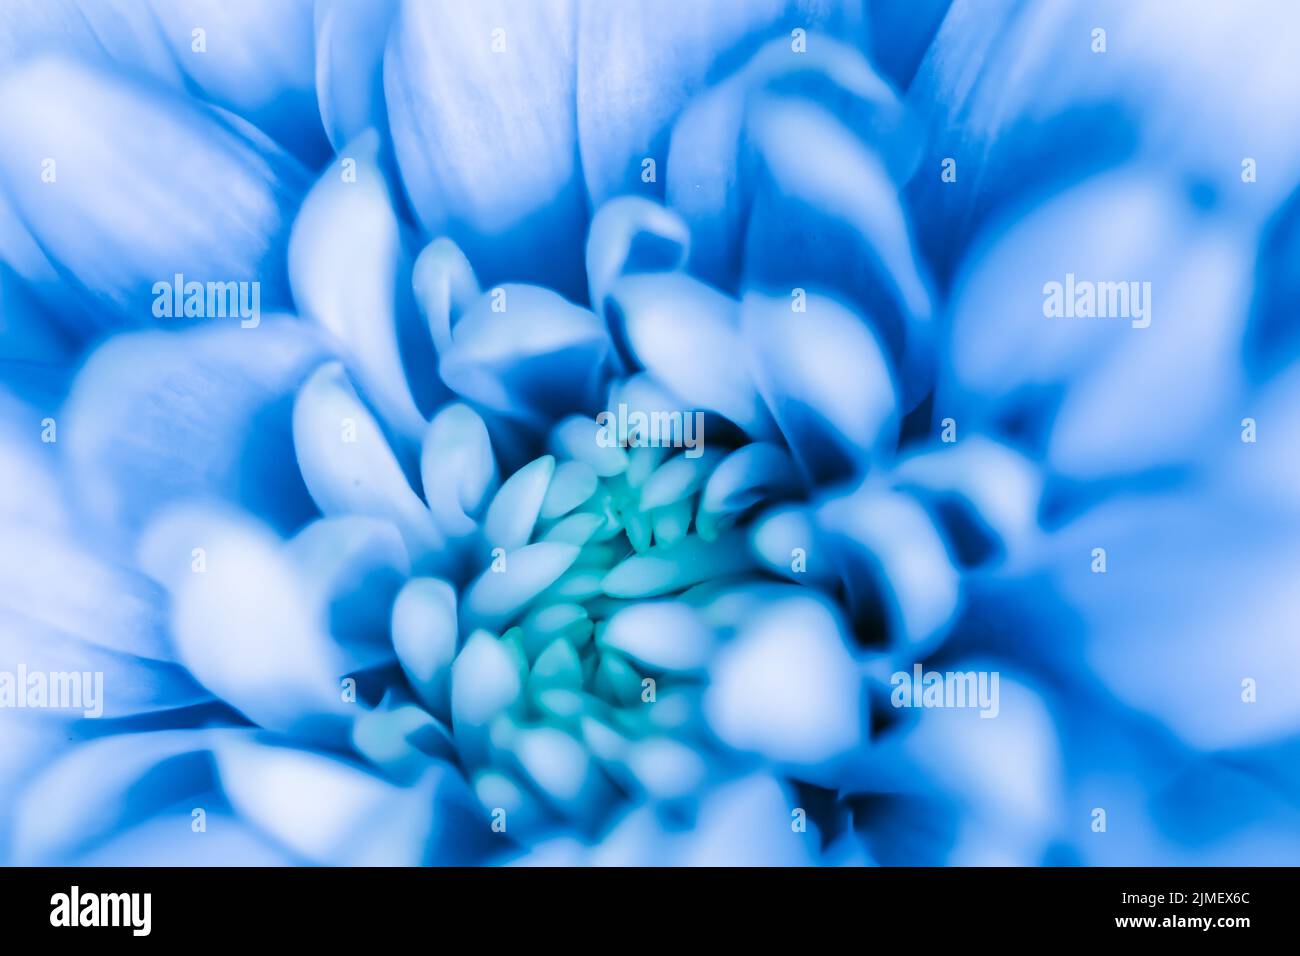 Abstract floral background, blue chrysanthemum flower. Macro flowers backdrop for holiday brand design Stock Photo